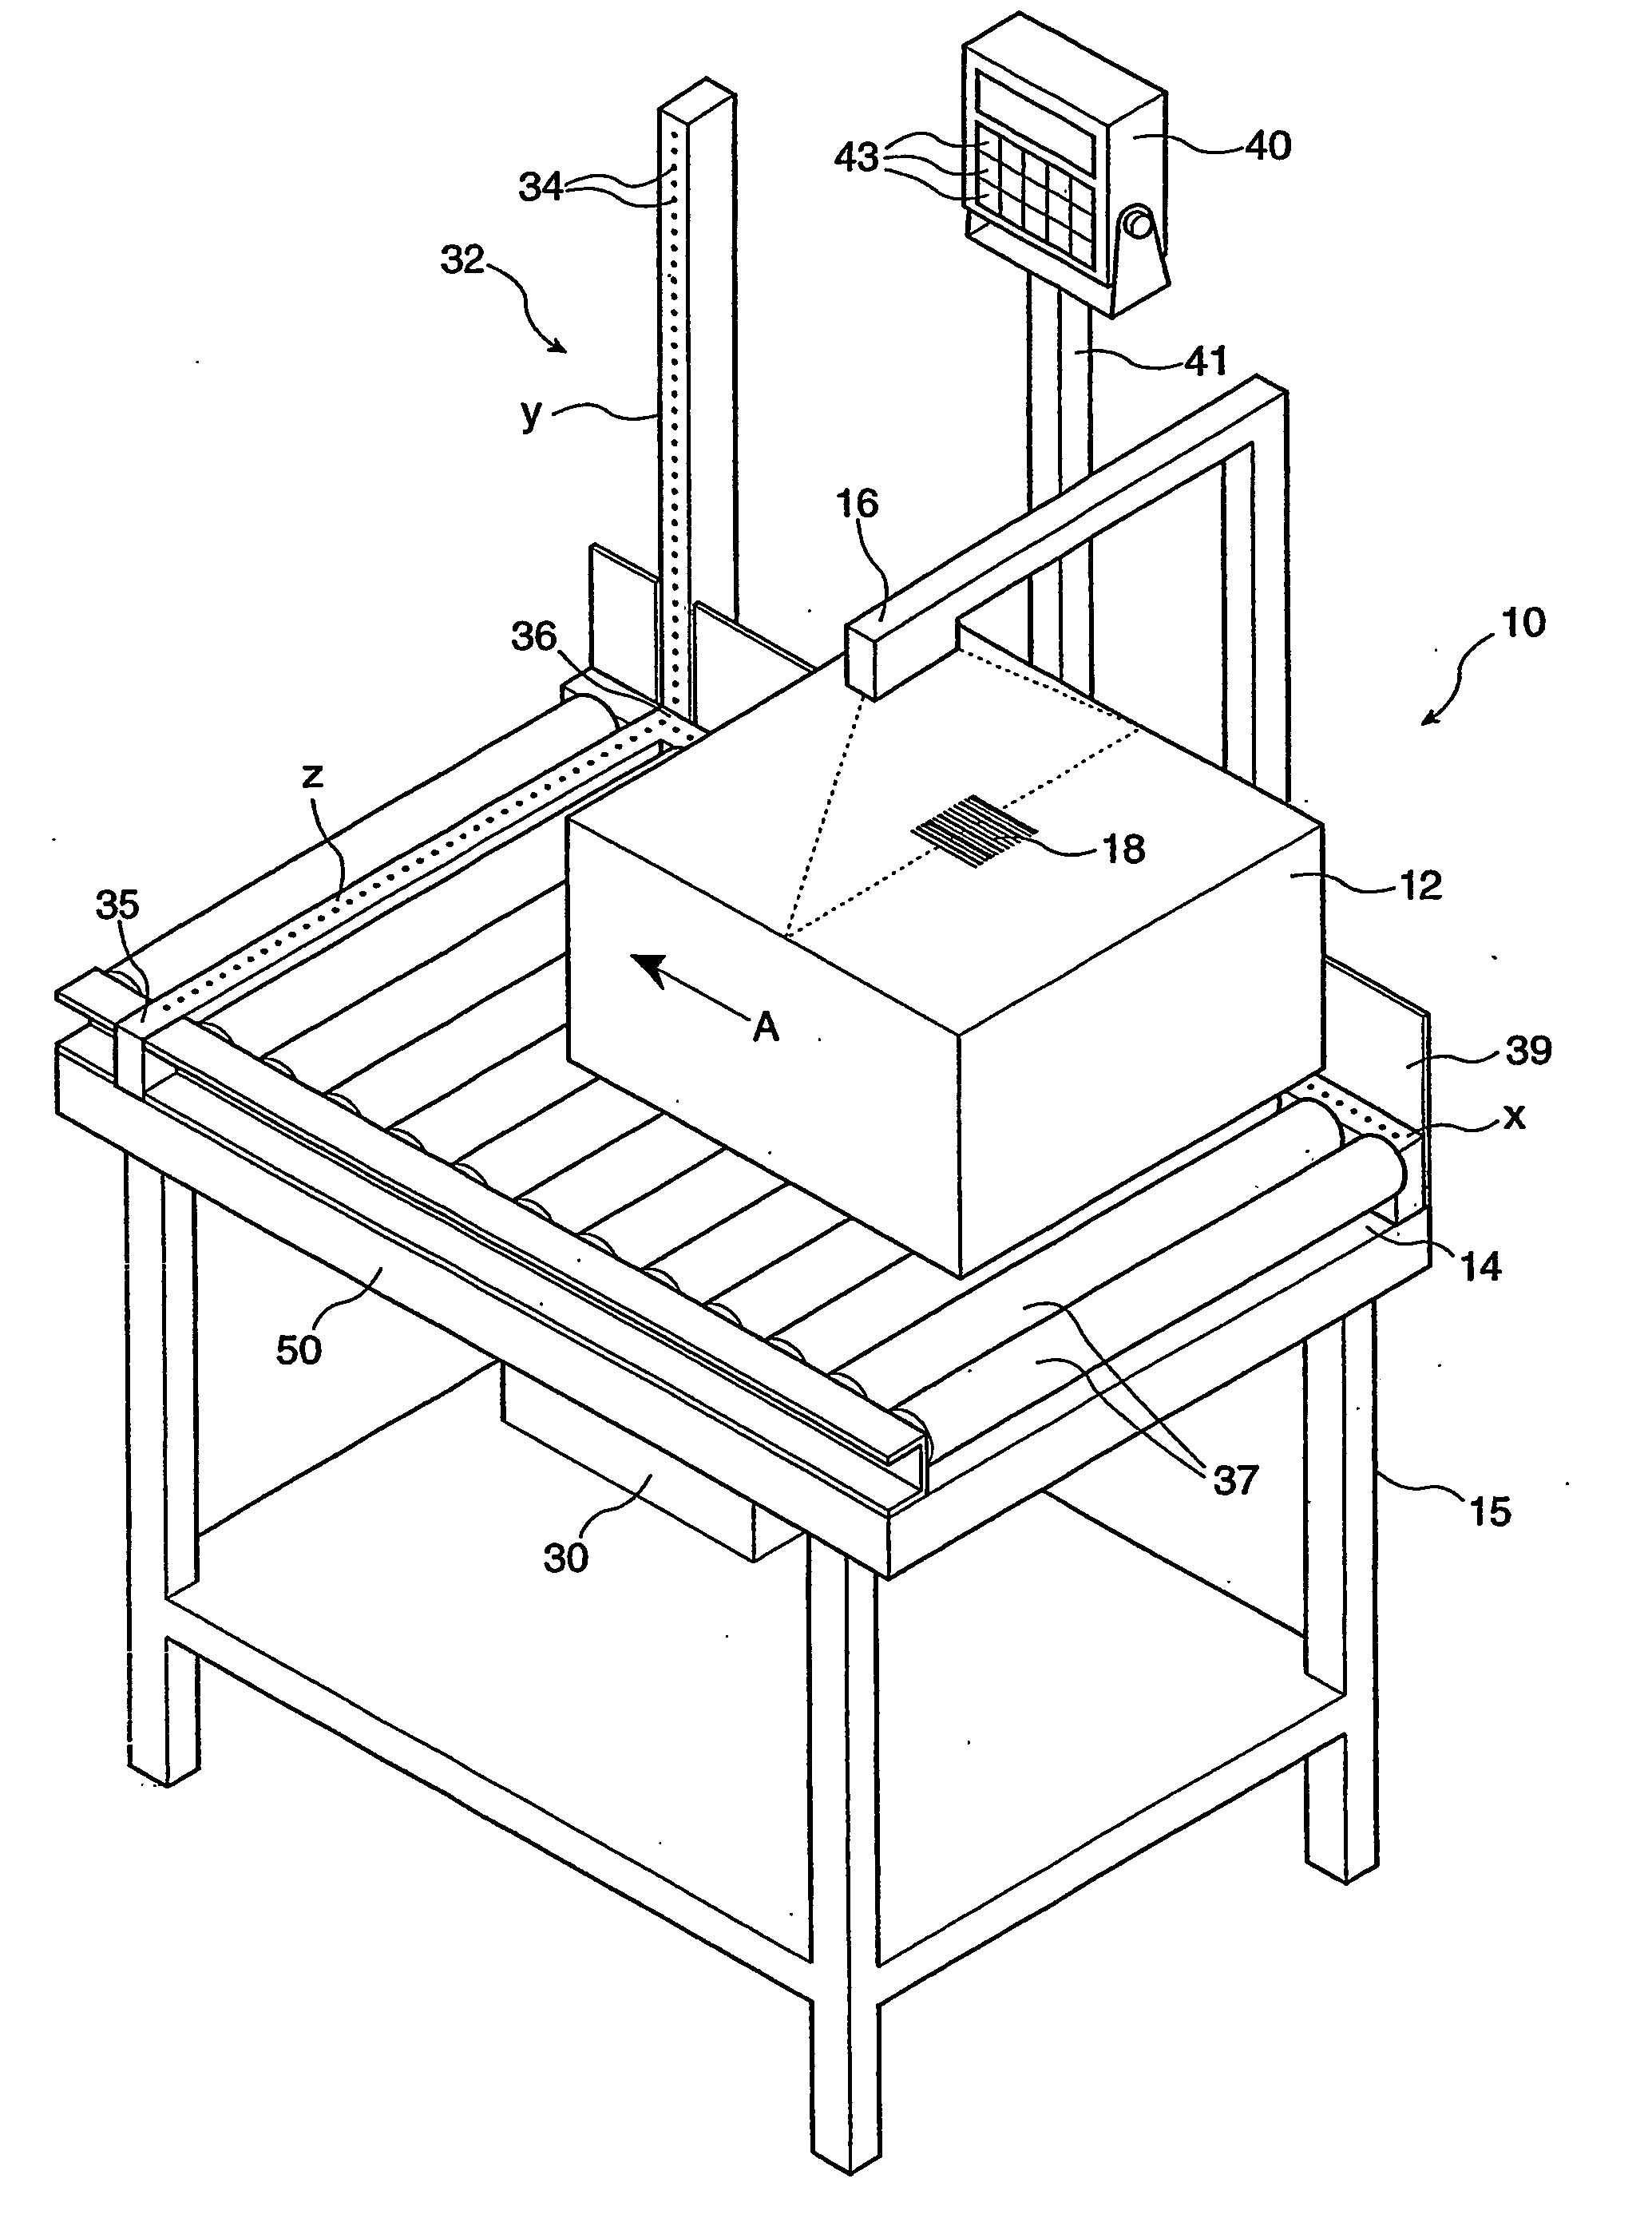 Franking system and method